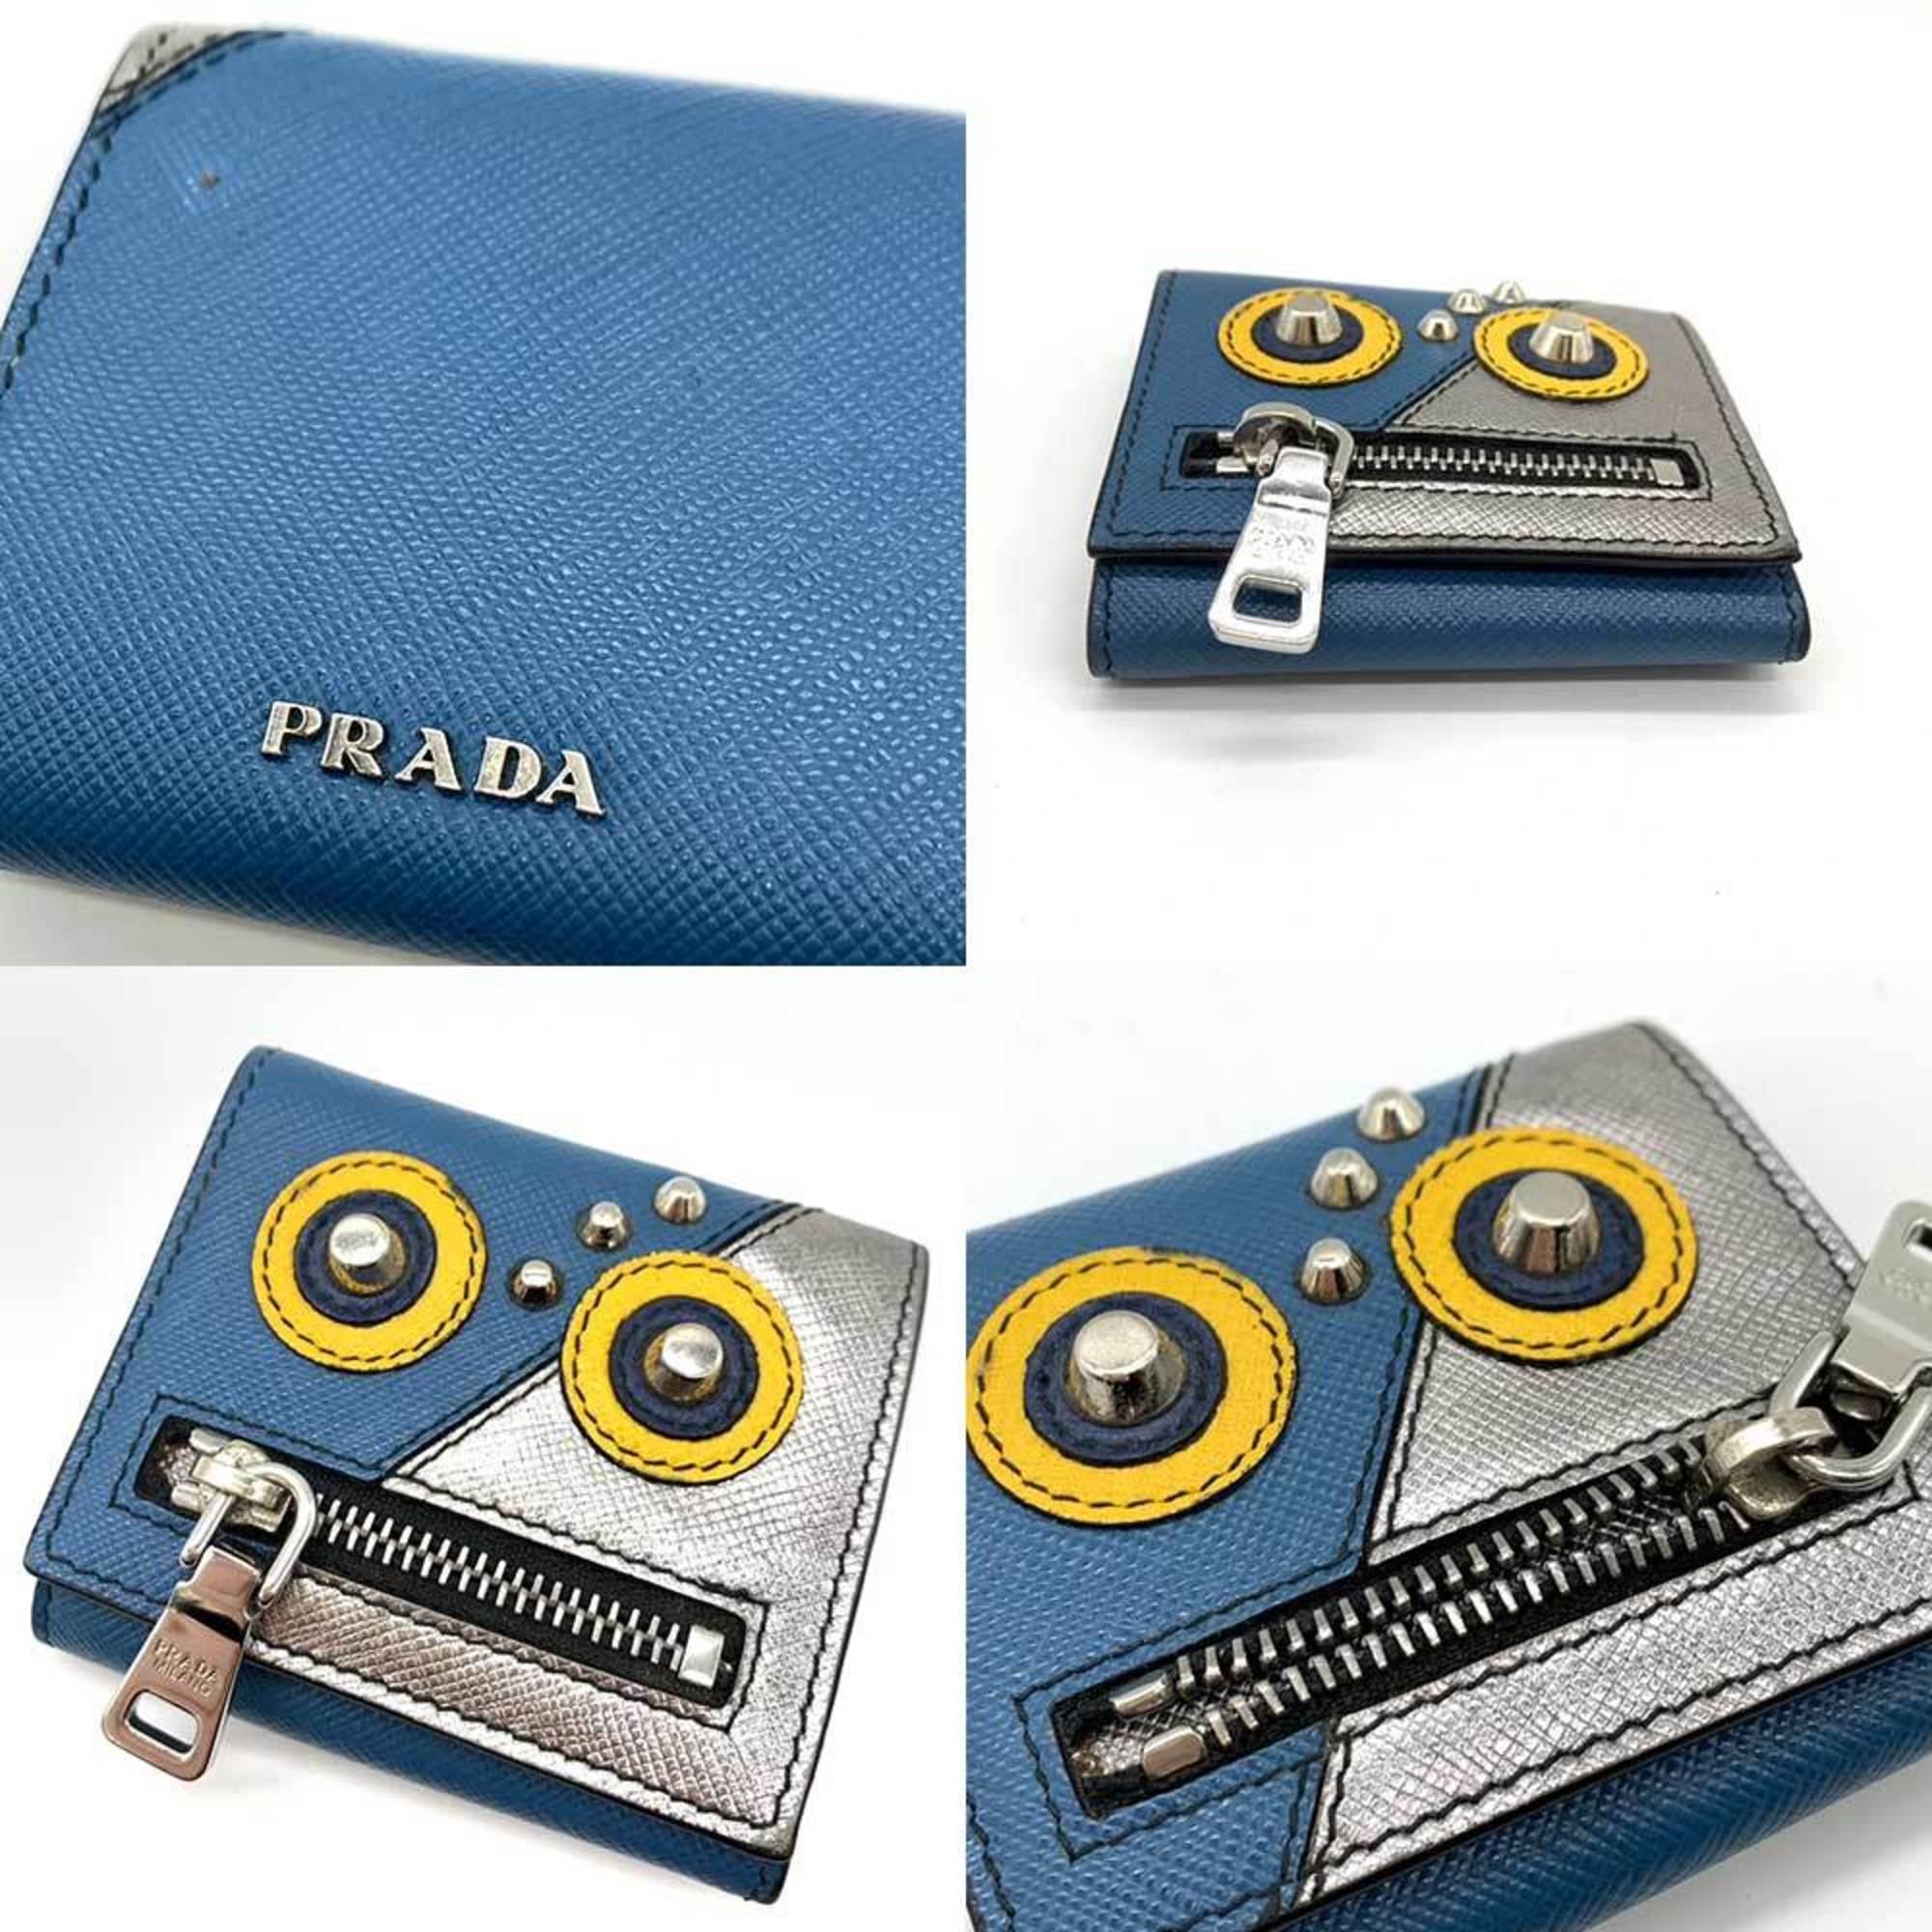 PRADA Wallet Robot Wallet/Coin Case Blue x Yellow Silver Color Metallic Coin Purse Square Studs Ladies Men's Saffiano Leather 2MM935